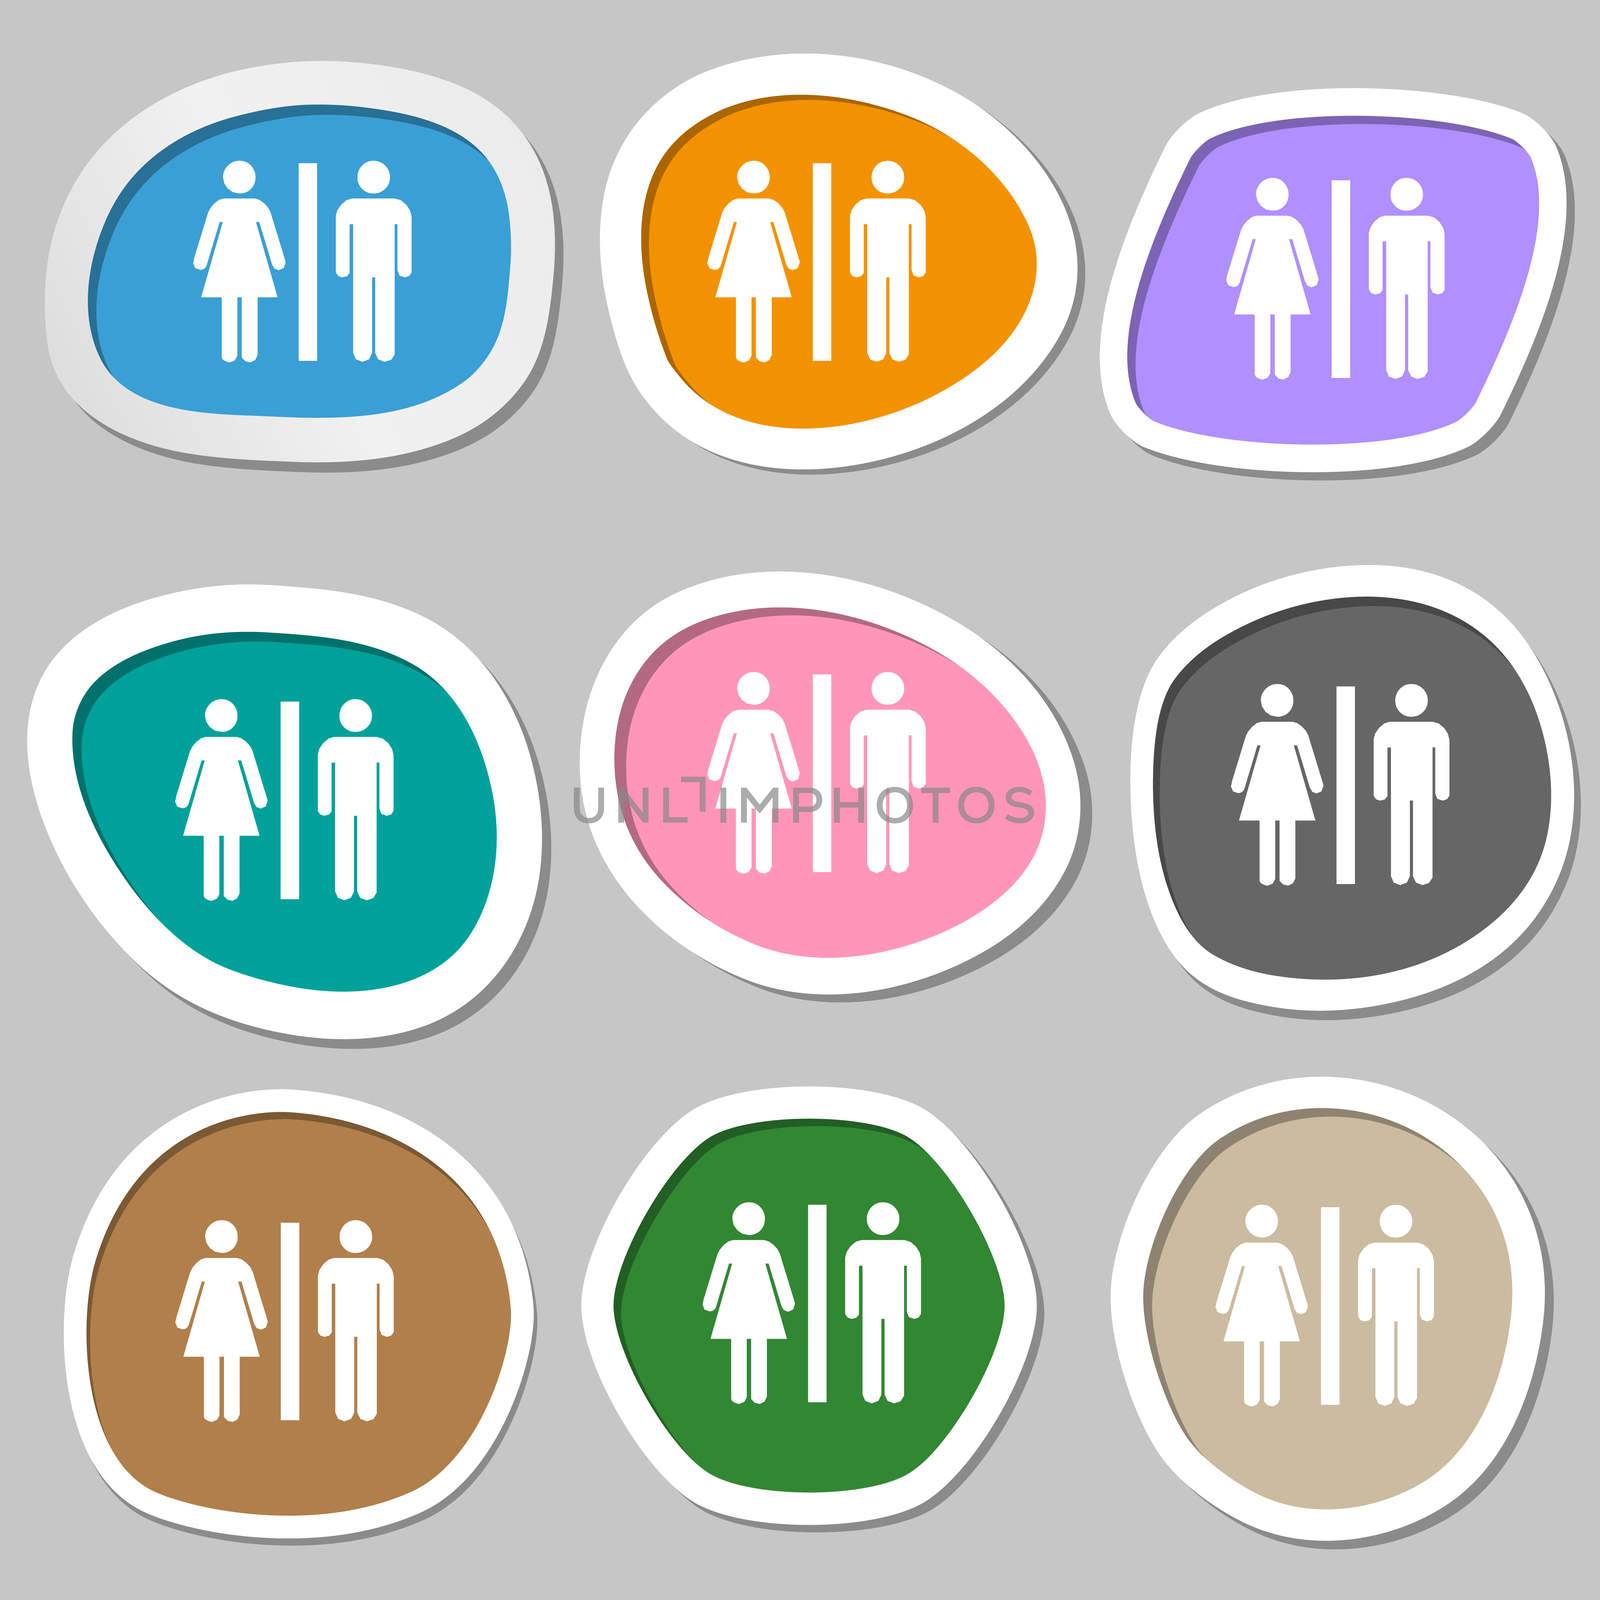 silhouette of a man and a woman icon symbols. Multicolored paper stickers. illustration